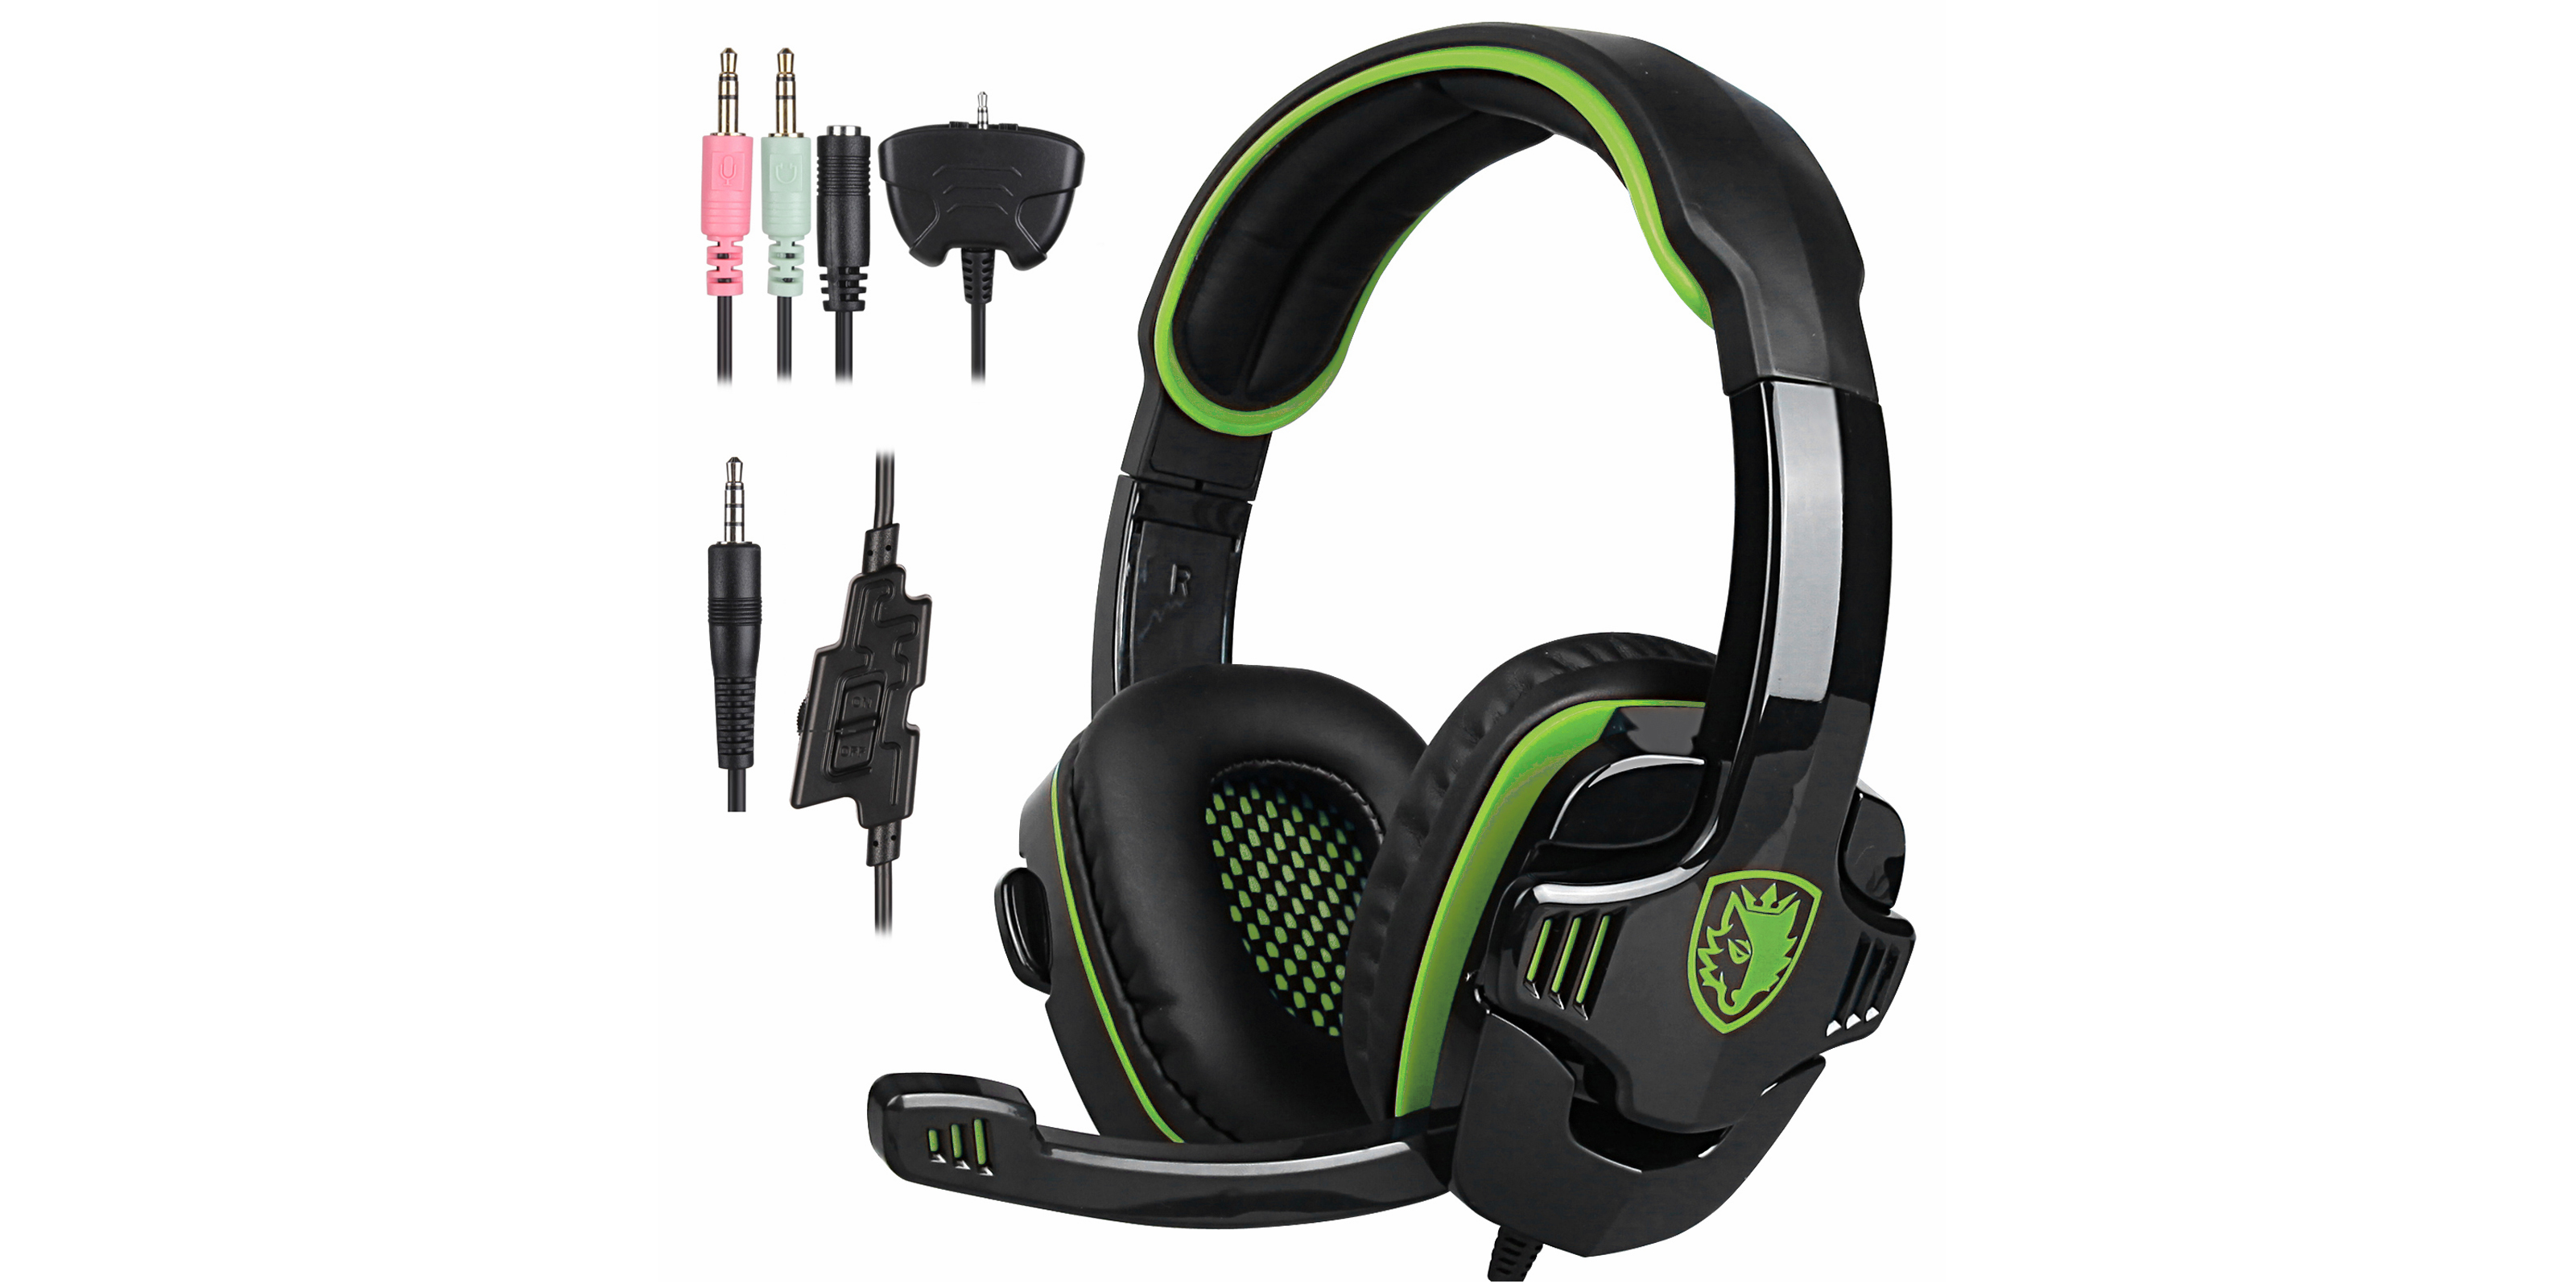 Sades HiFi Stereo Bass Headset for Gaming Only $12.99! (Green)